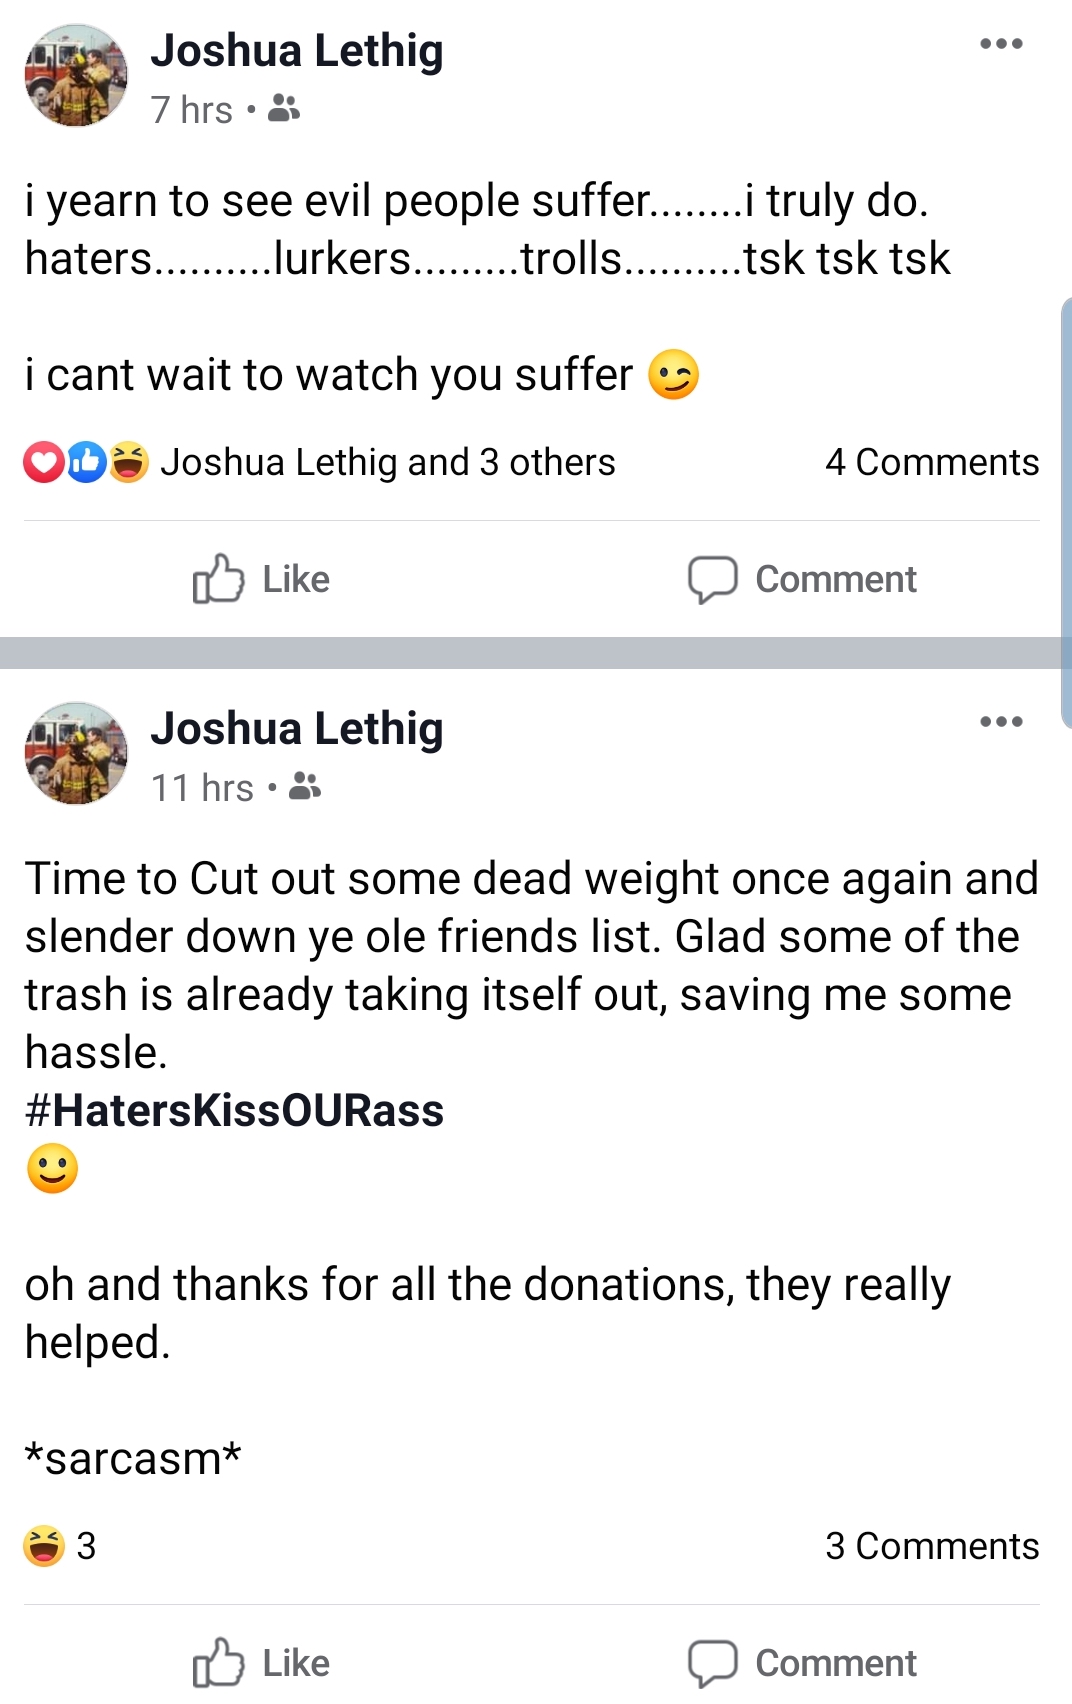 screenshot - Joshua Lethig 7 hrs. i yearn to see evil people suffer........i truly do. haters..........lurkers......... trolls..........tsk tsk tsk i cant wait to watch you suffer Oo Joshua Lethig and 3 others 4 Comment Joshua Lethig 11 hrs. Time to Cut o